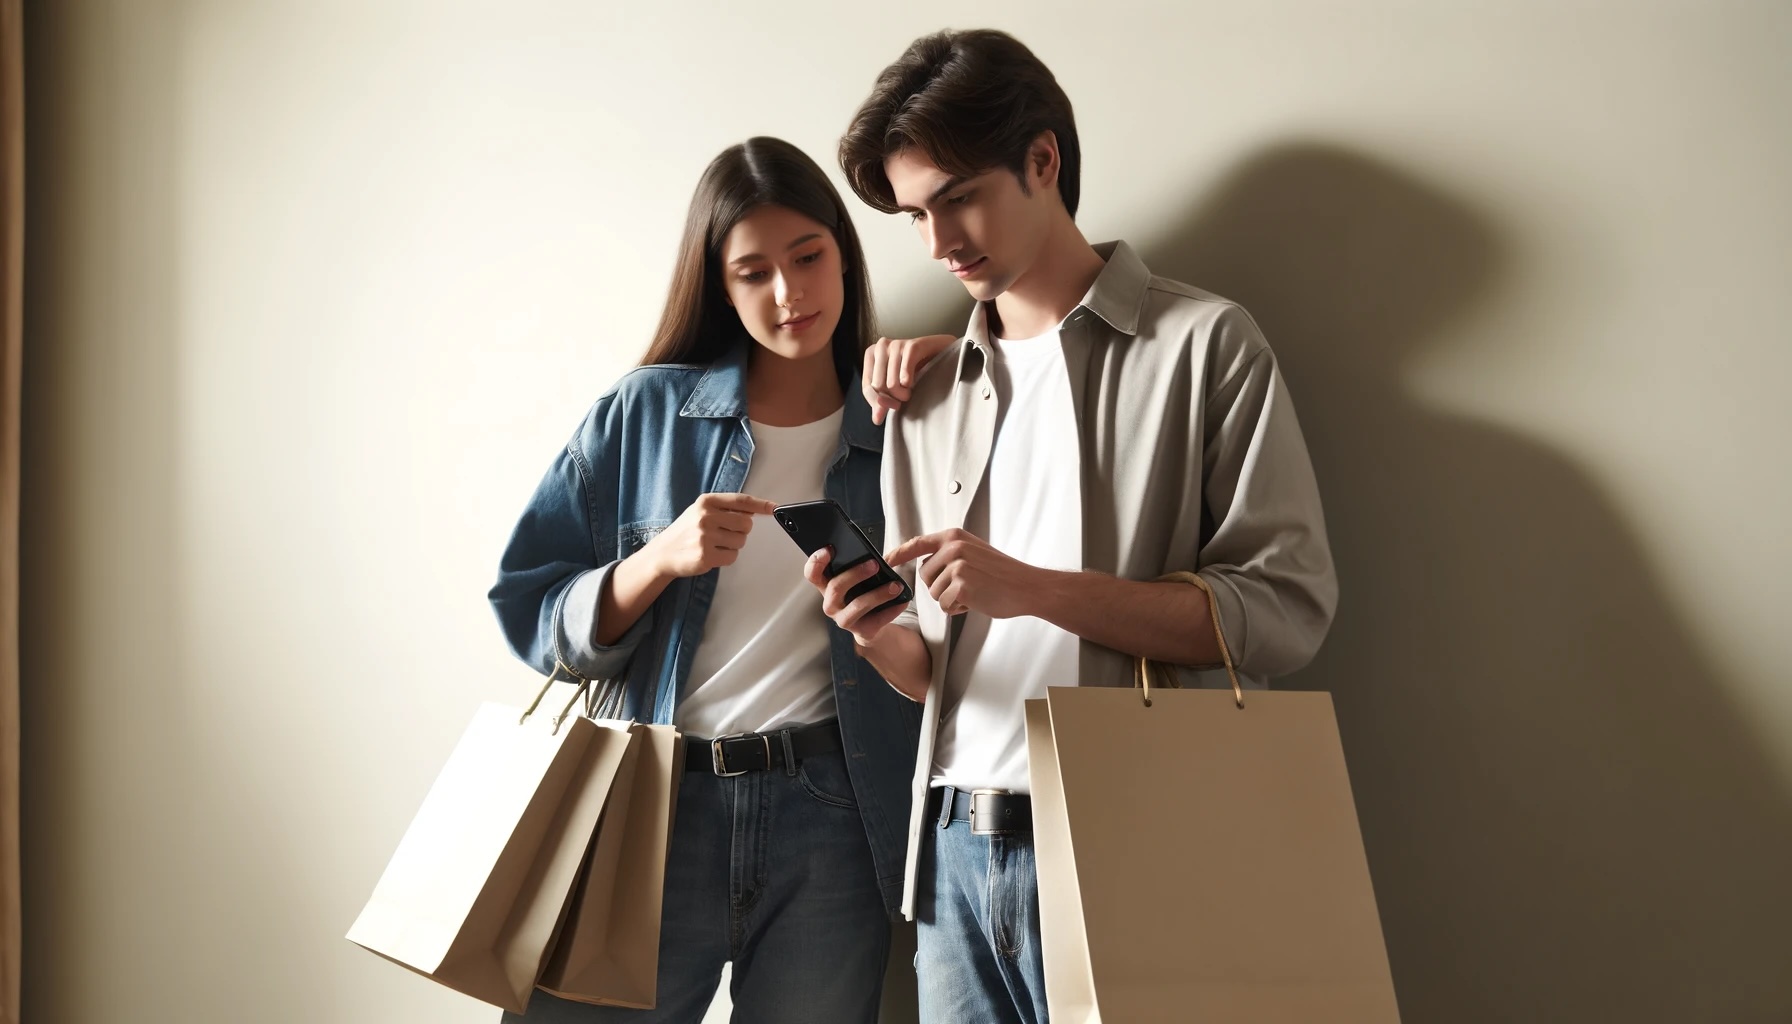 Two young dark haired ecommerce shoppers with the male showing the female something on their smartphone.